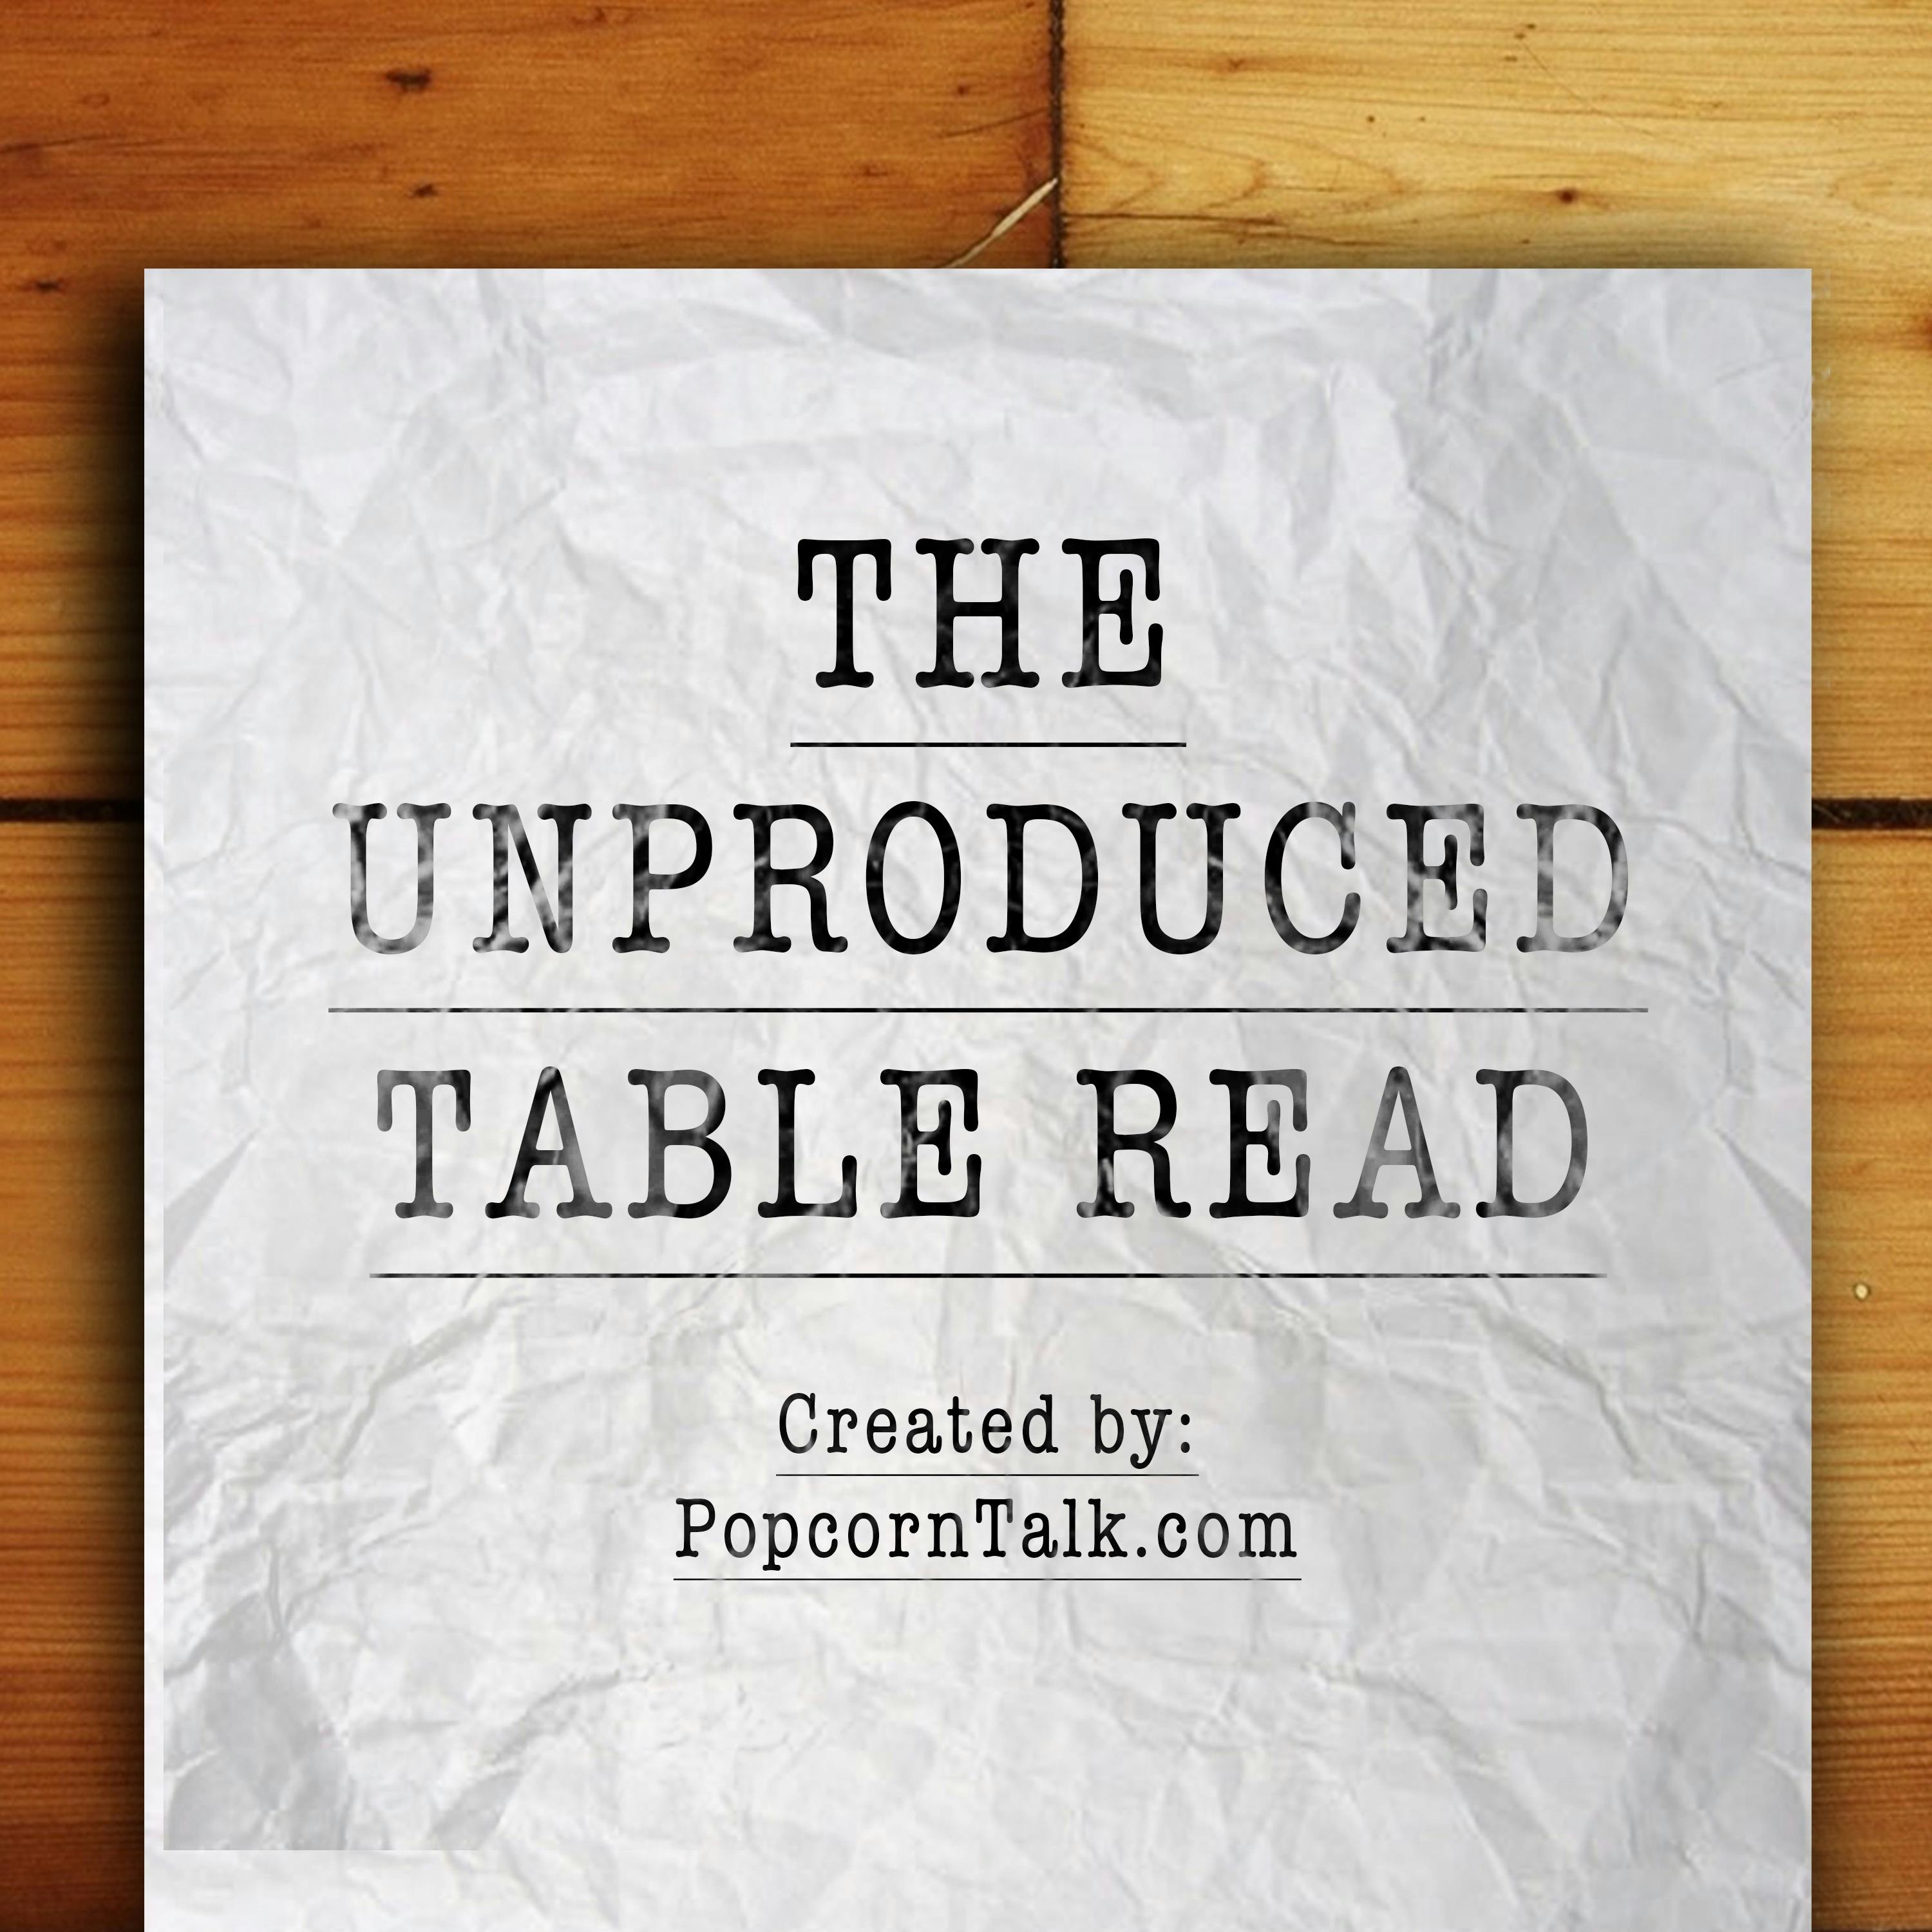 THE HUNTER AND THE MYSTIC w/ Whitney Hamilton – The Unproduced Table Read #15